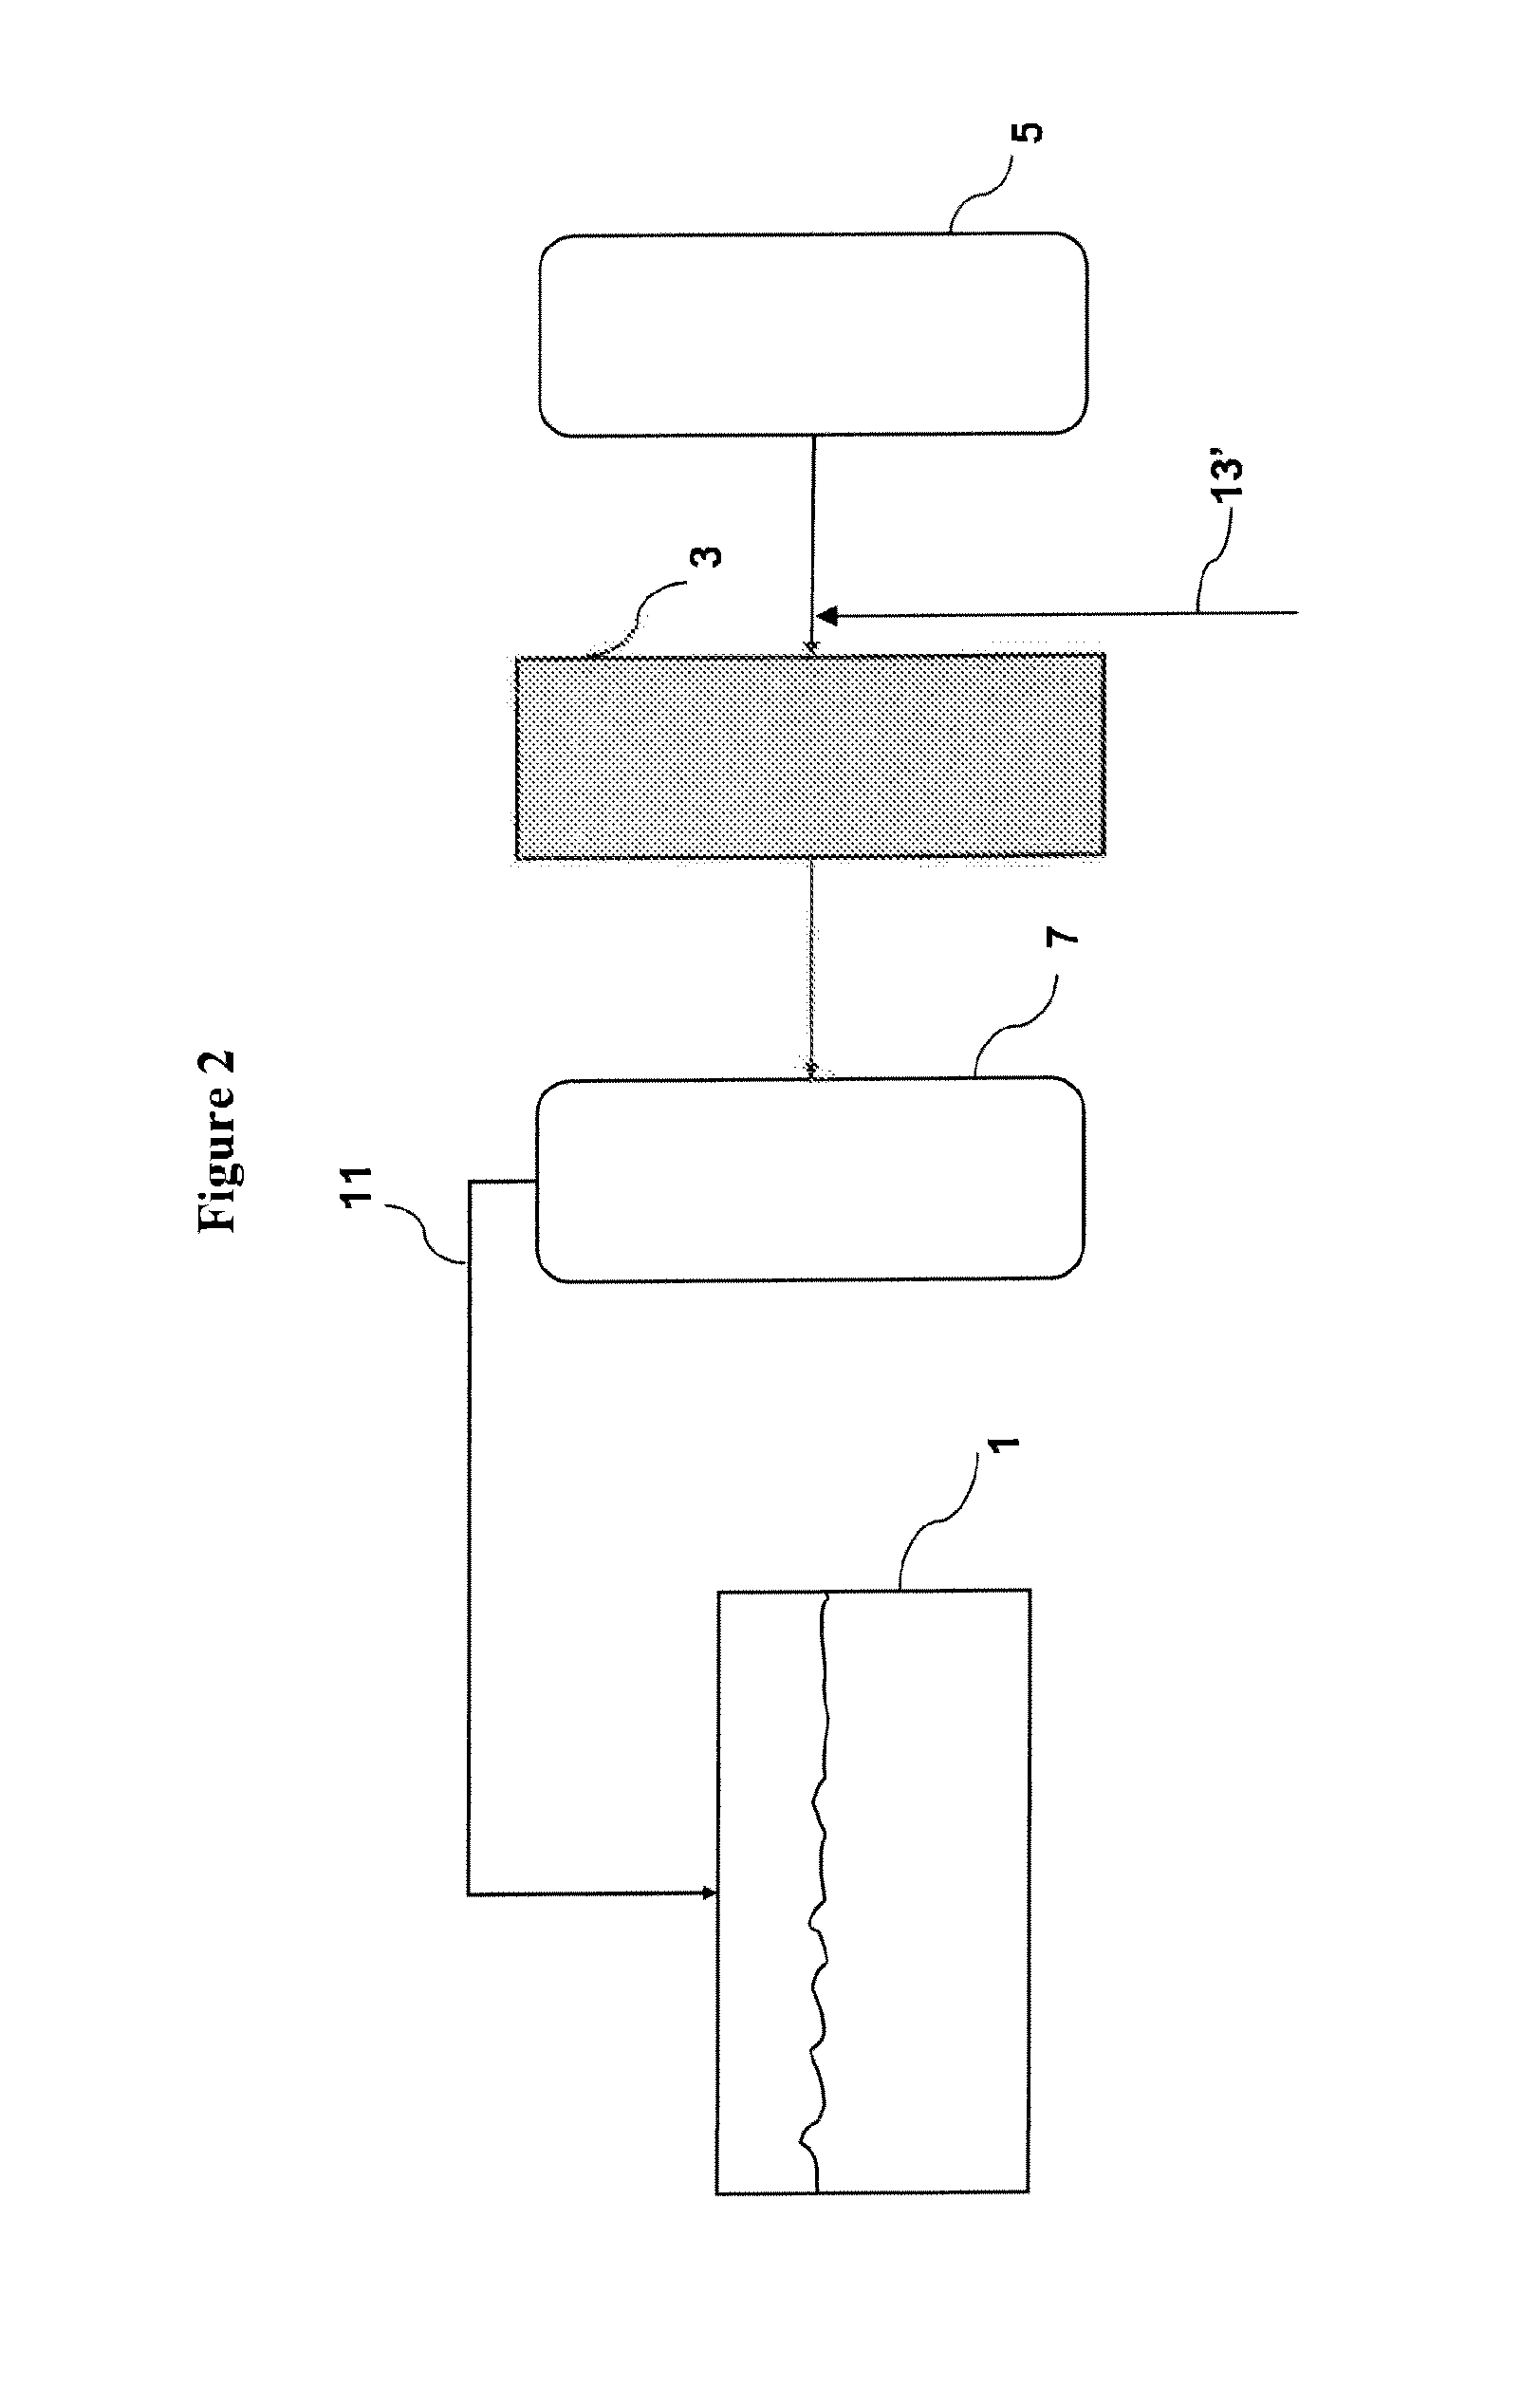 Reactive component reduction system and methods for the use thereof